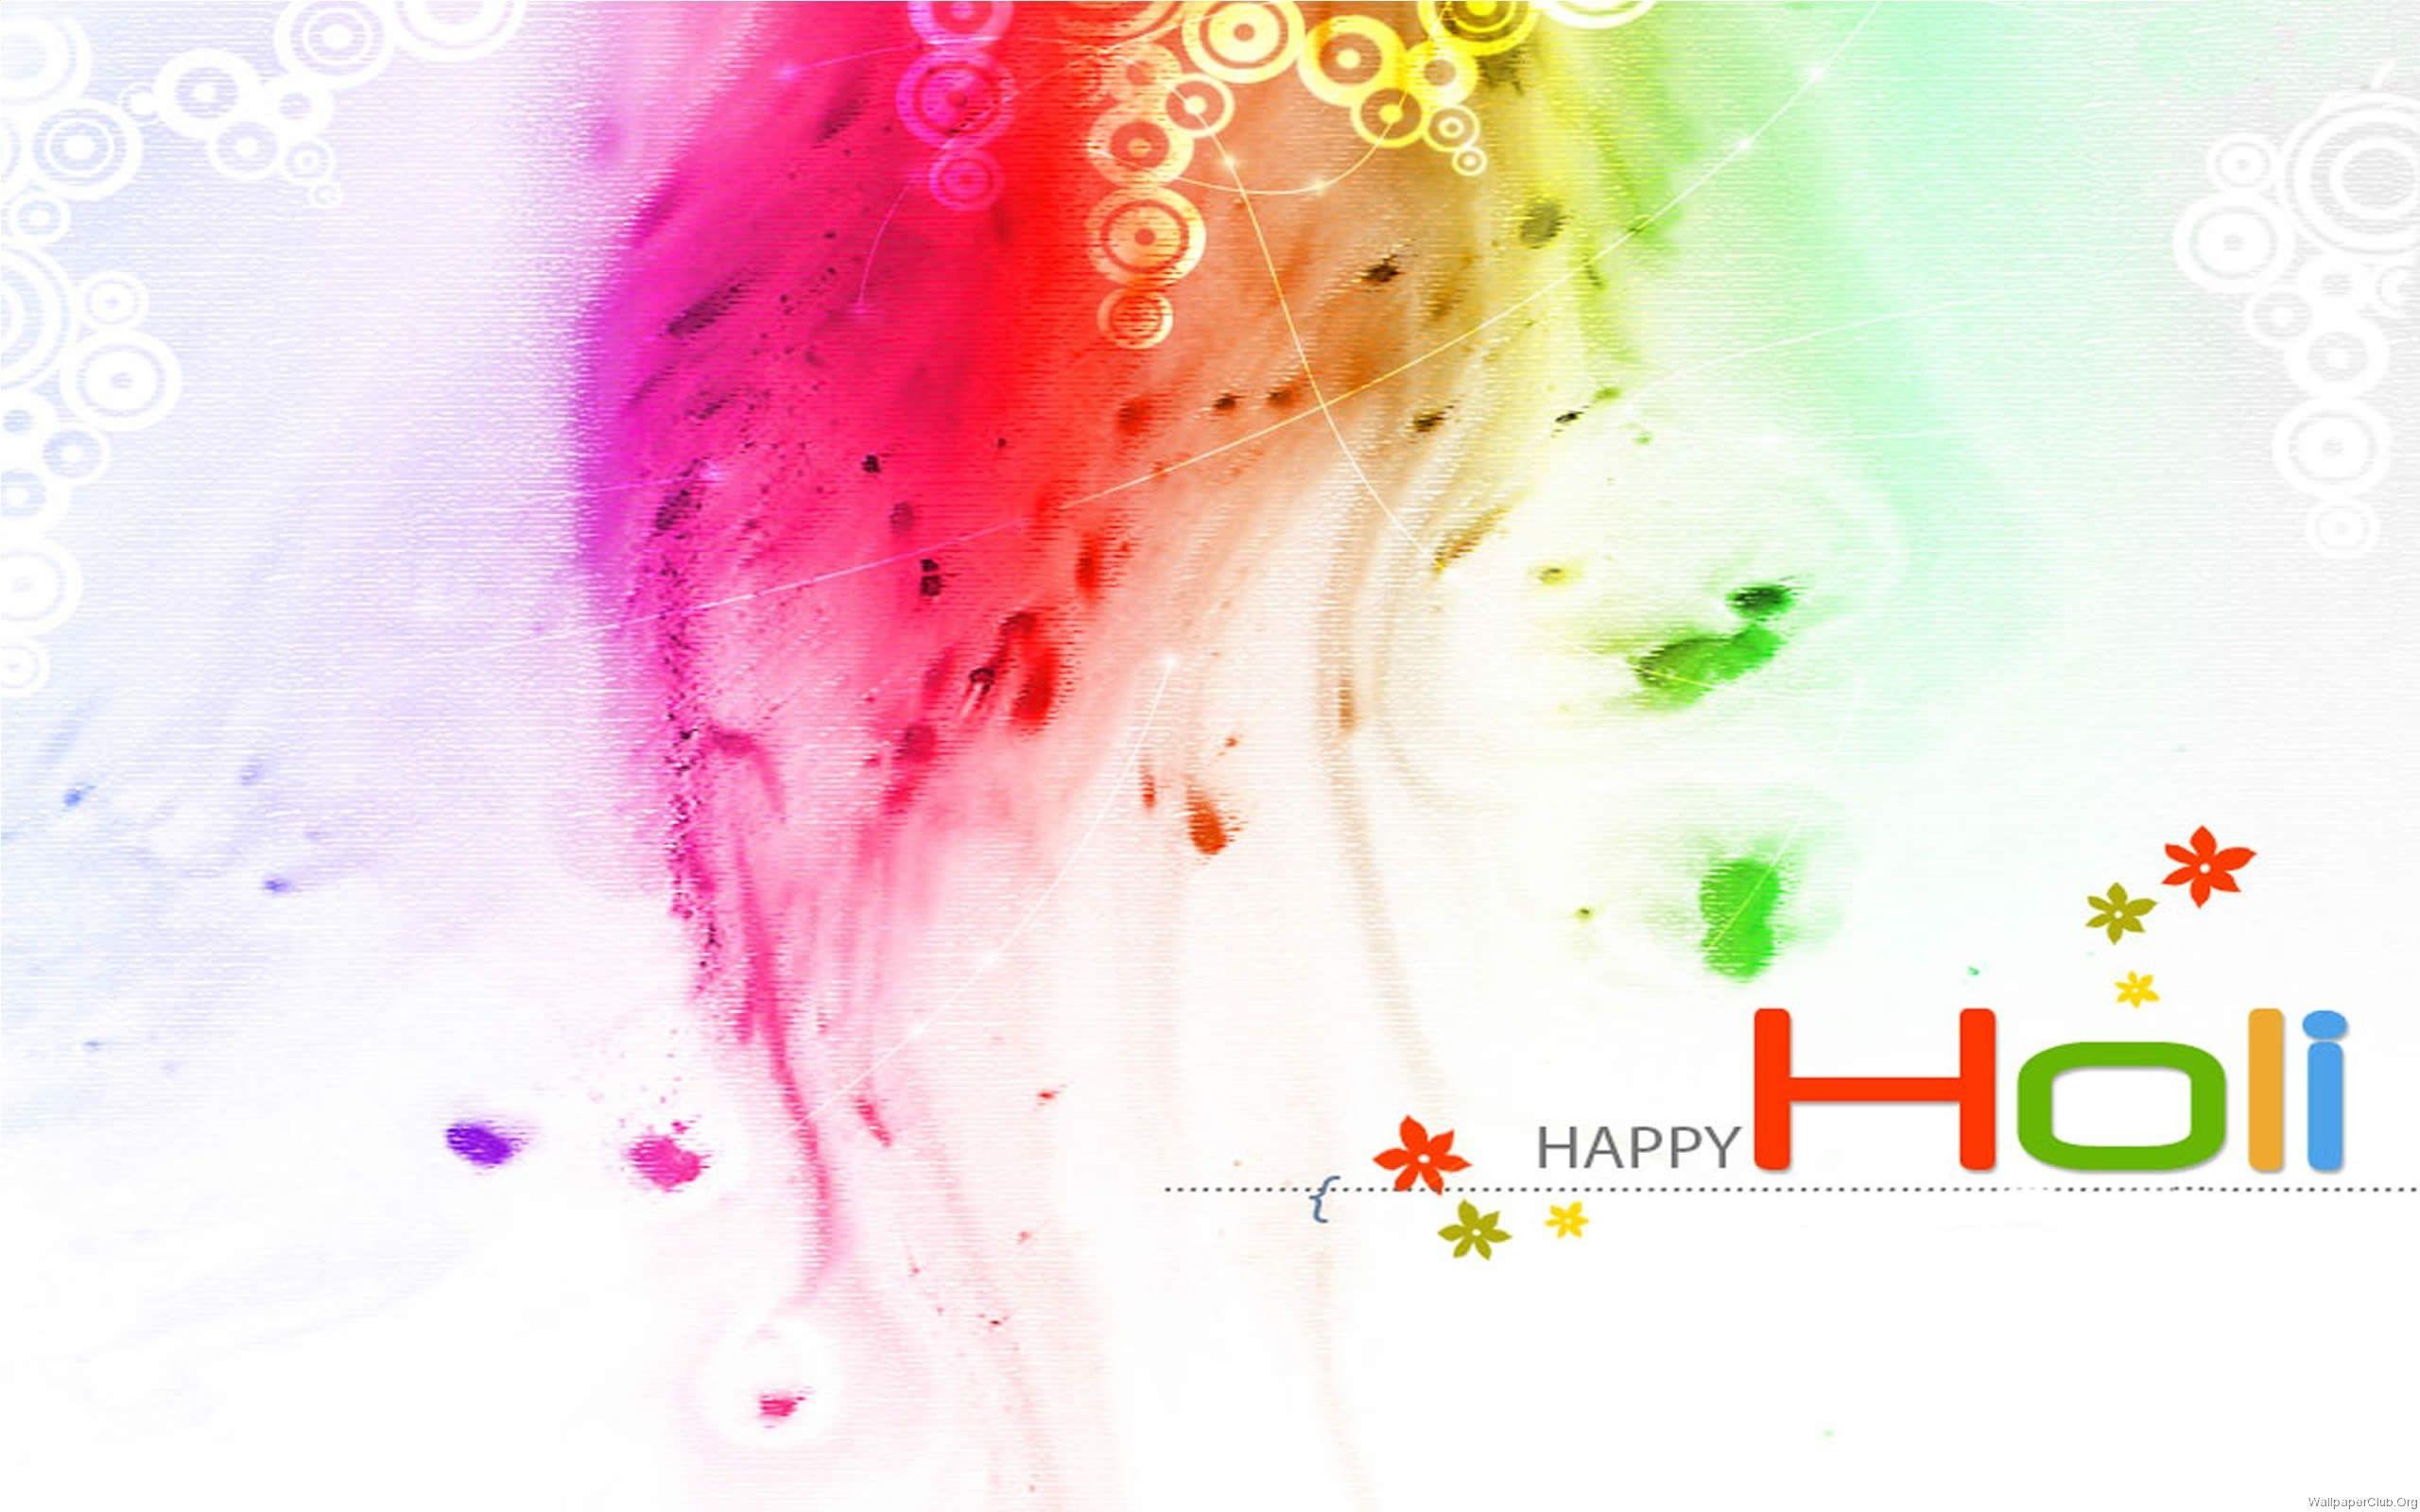 Happy Holi 2017 Wallpaper, Image Wishes Photo for HD, 4k, Wide